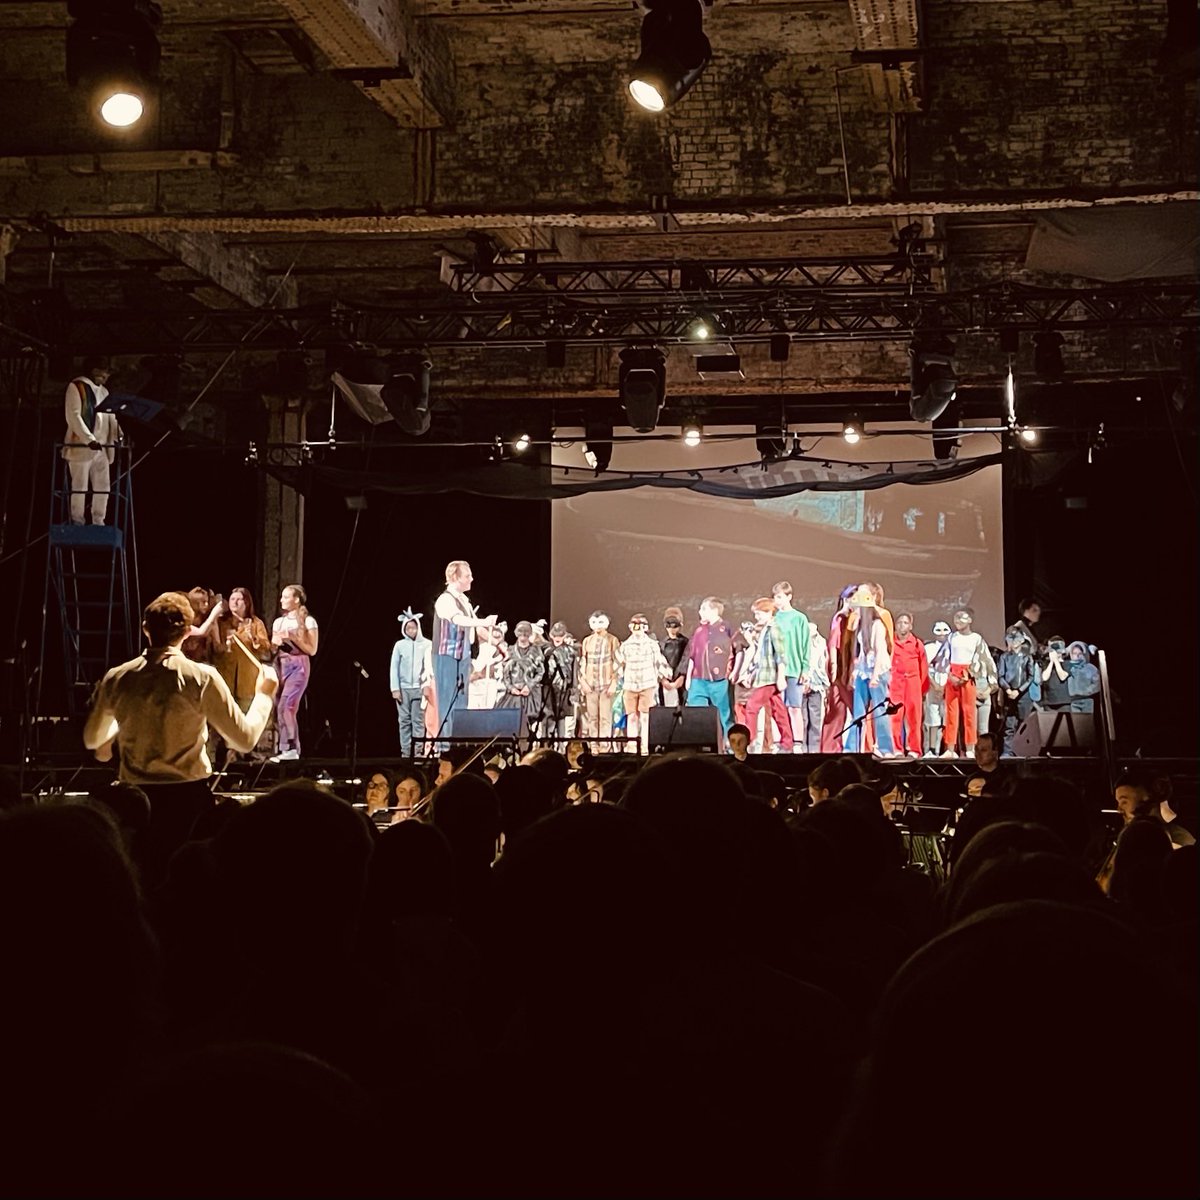 Huge thanks to @factoryintl for an amazing weekend at Manchester International Festival. And congrats to @manc_collective & @SlungLow for an incredible ‘Noah’s Flood’ performance at the Depot yesterday ft. @lemnsissay and over 200 performers! #Britten #MIF23 | @PRSFoundation